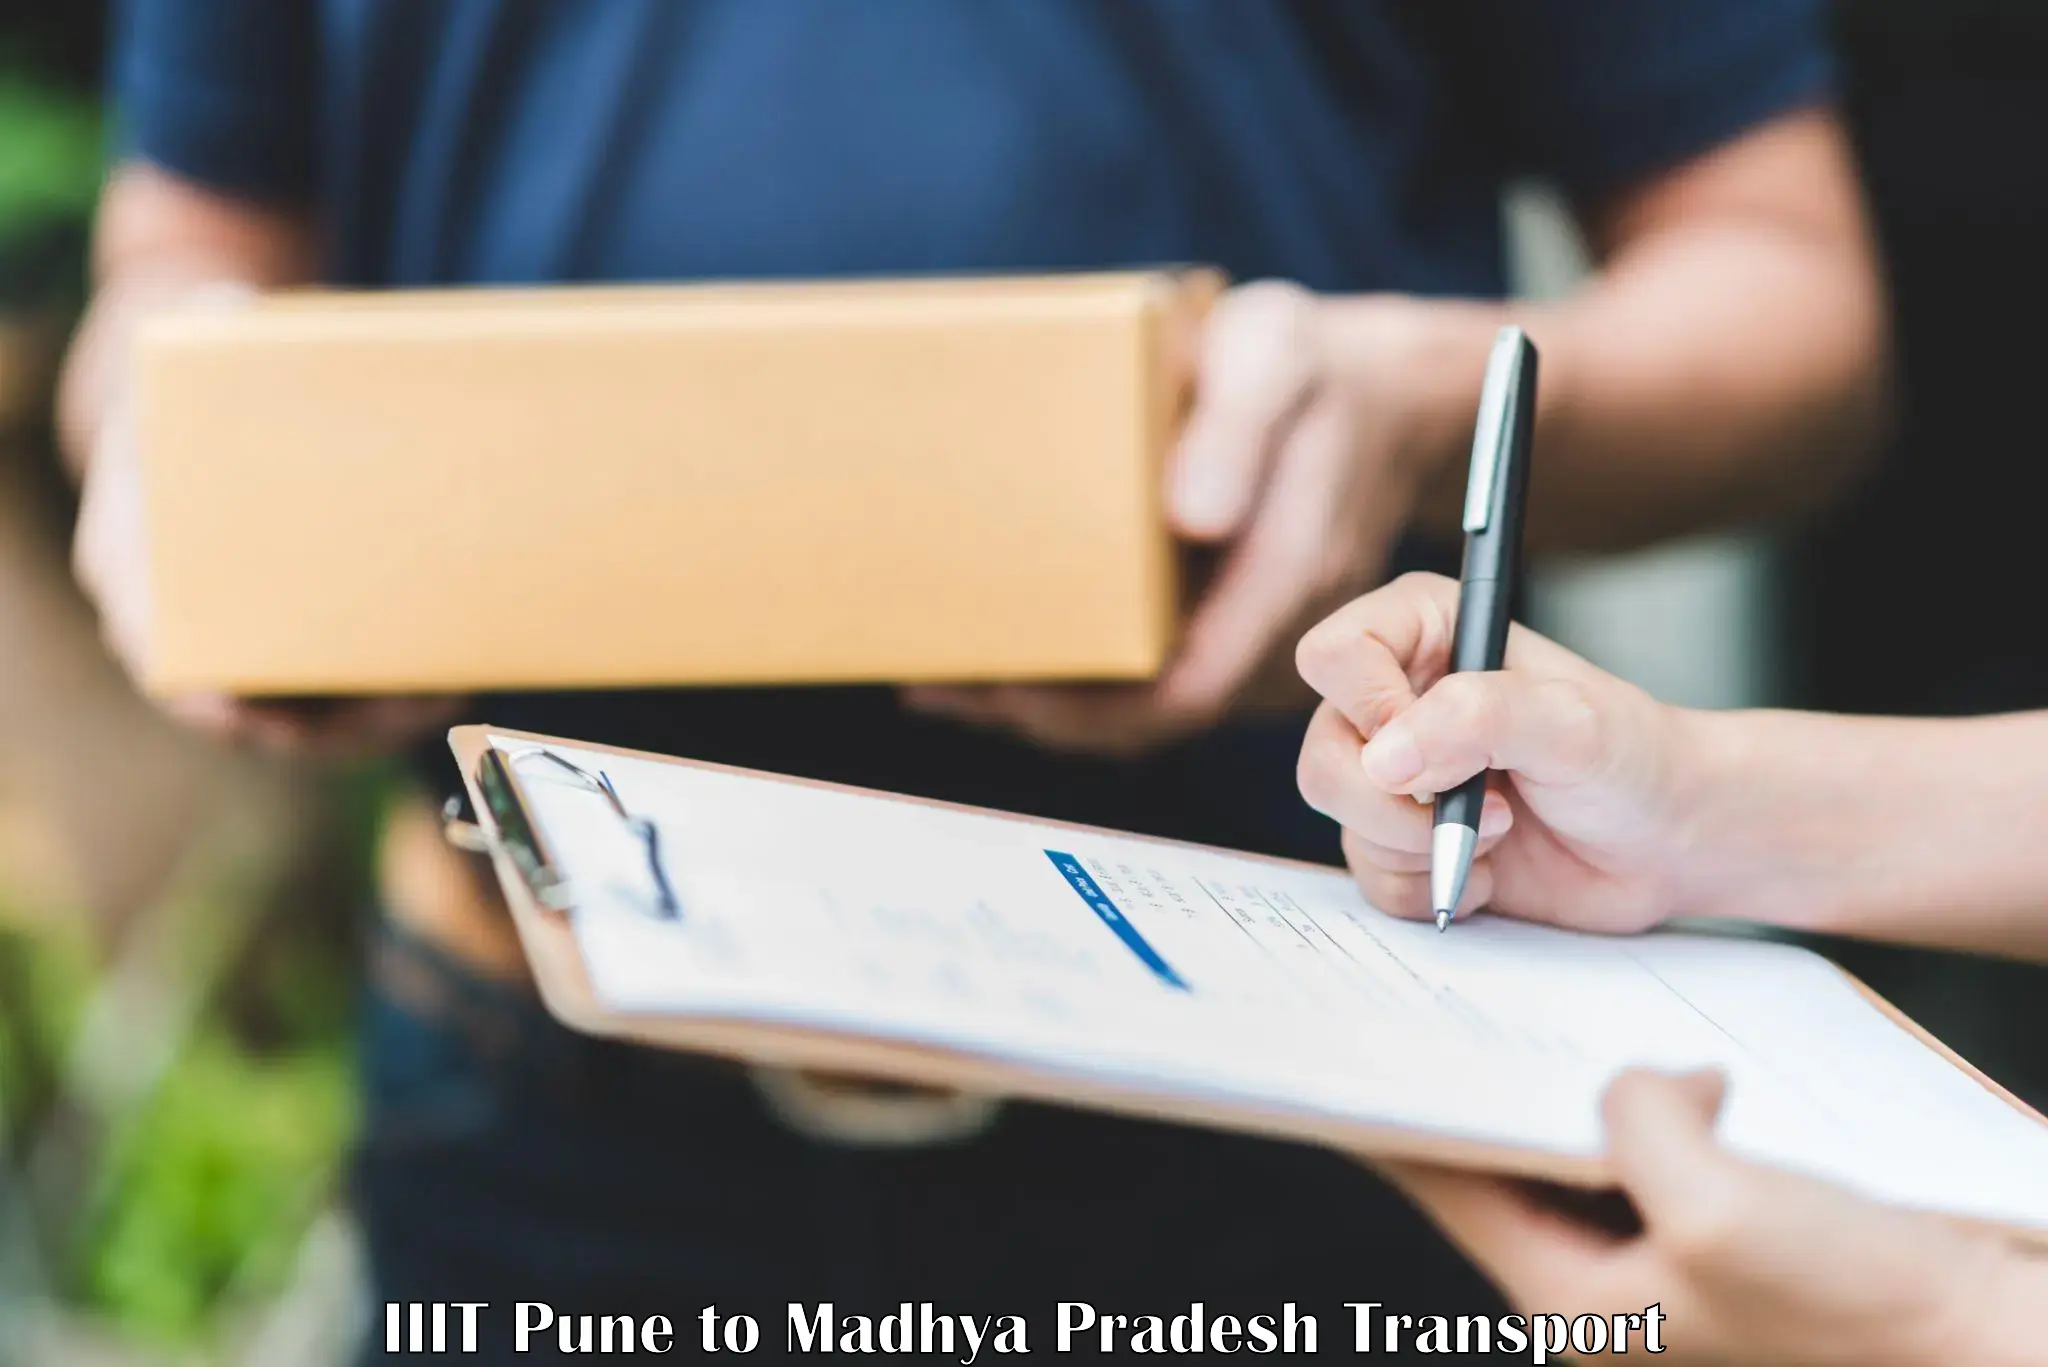 Container transportation services IIIT Pune to Mundi